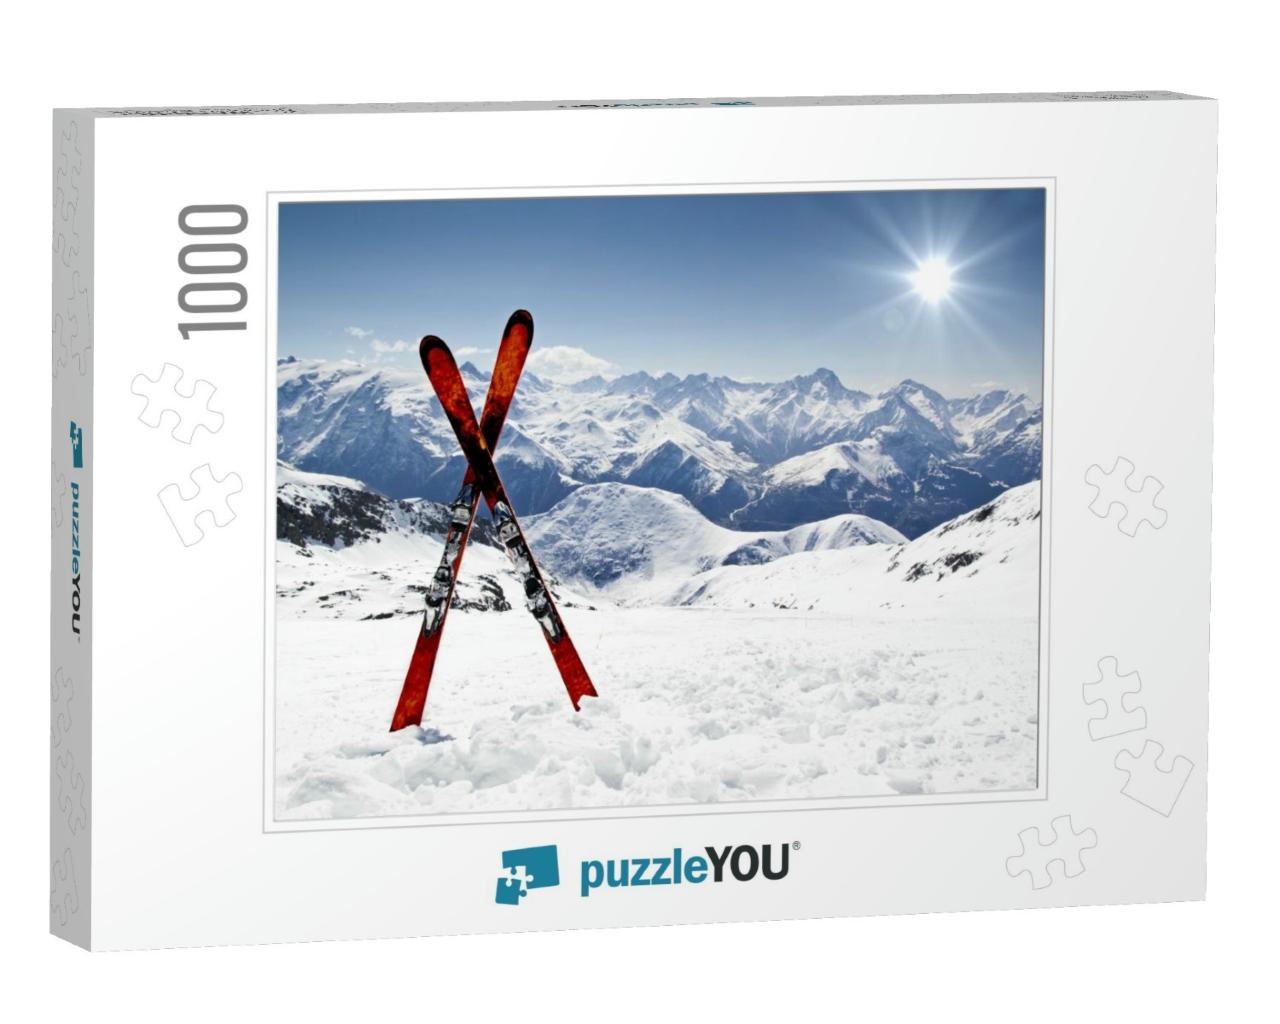 Pair of Cross Skis in Snow... Jigsaw Puzzle with 1000 pieces